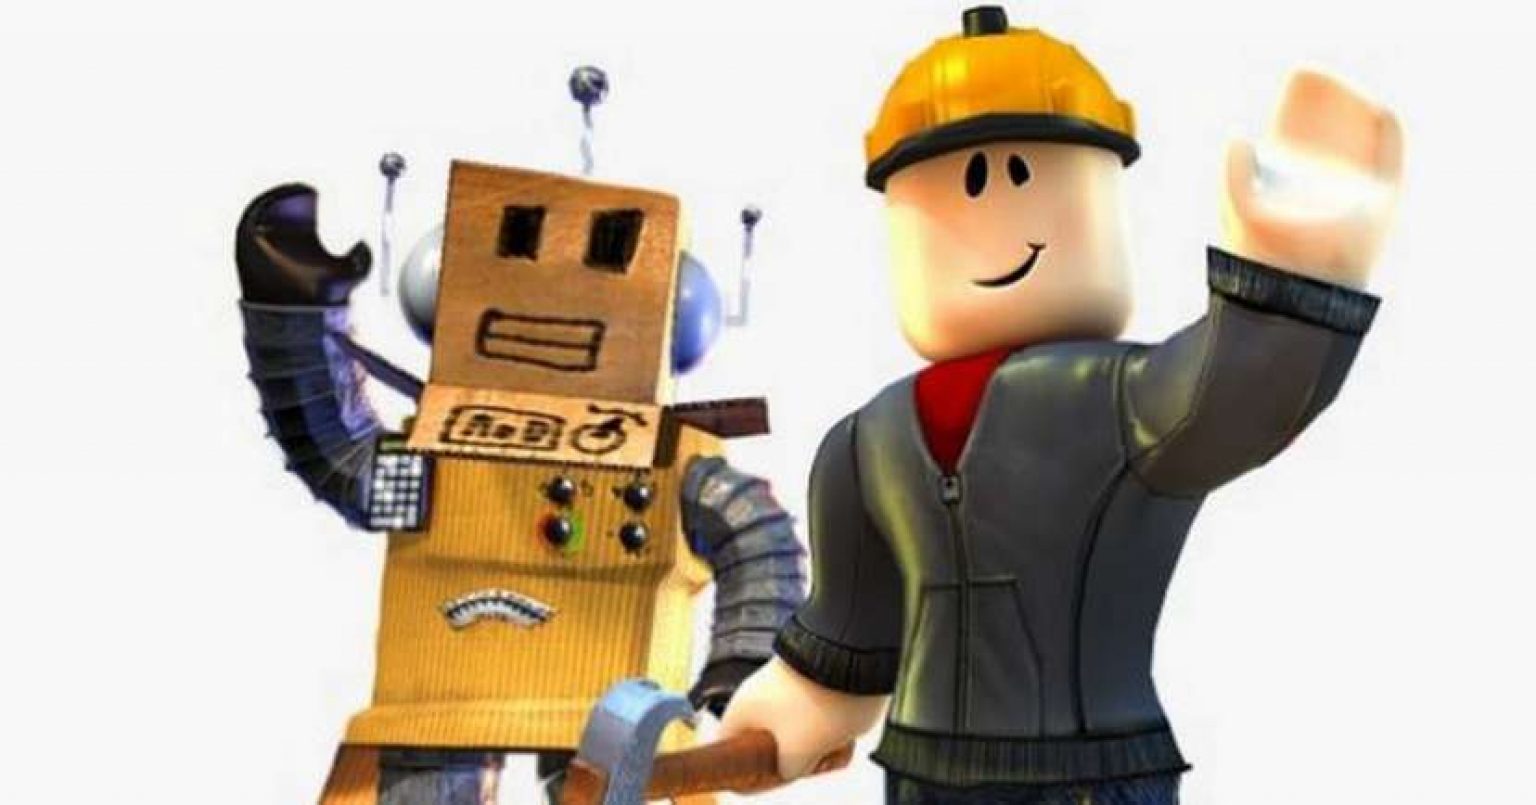 roblox for windows 10 free download